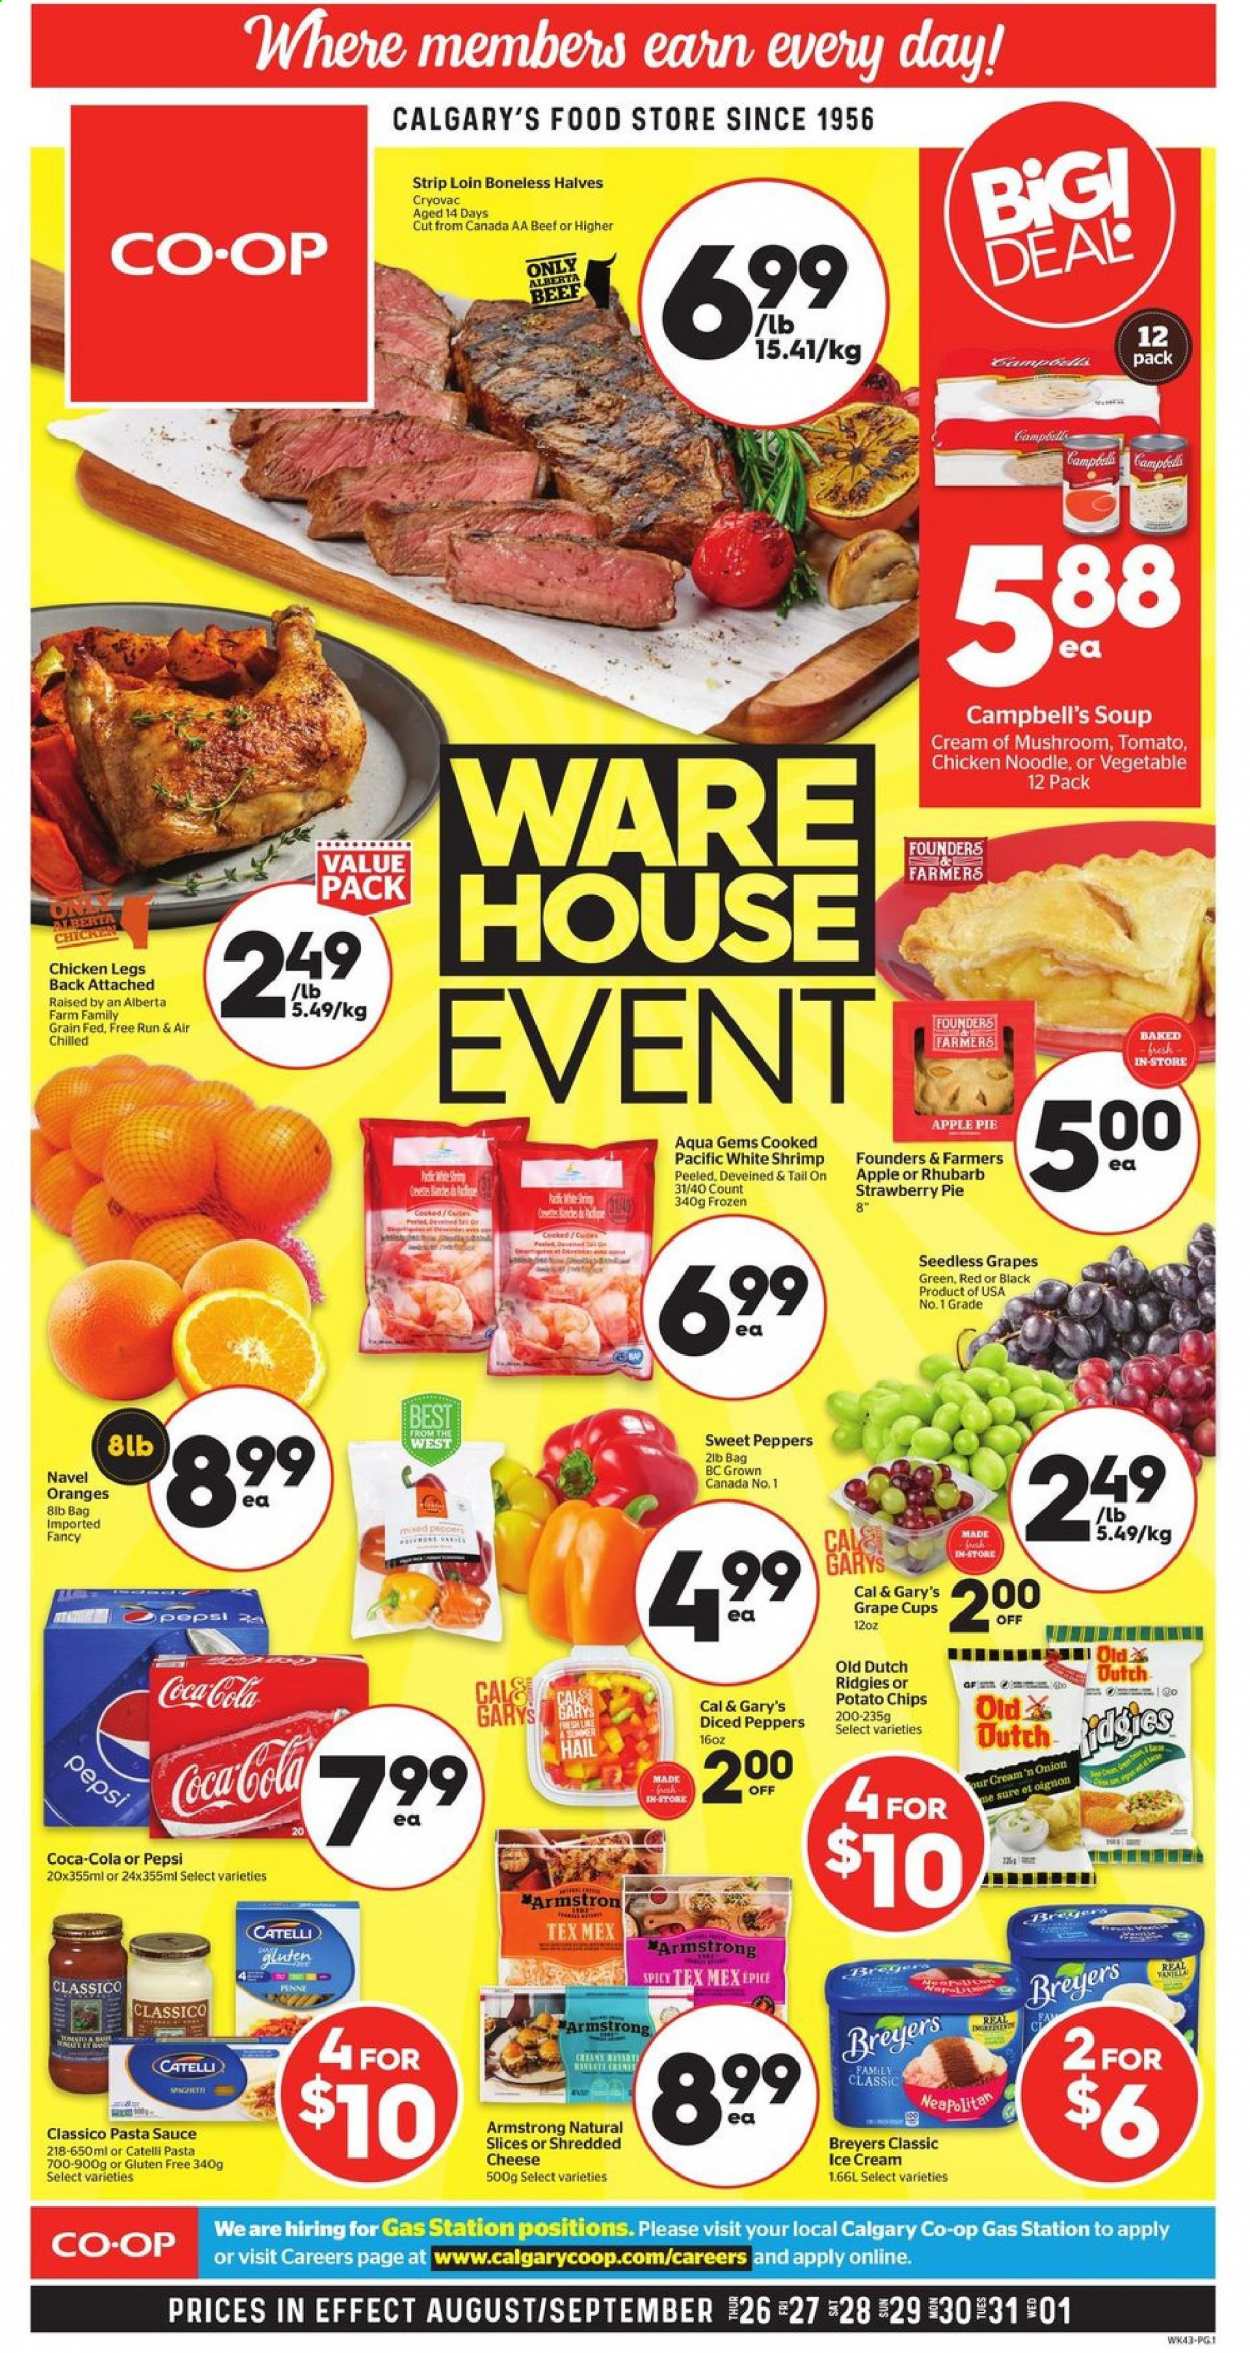 thumbnail - Calgary Co-op Flyer - August 26, 2021 - September 01, 2021 - Sales products - pie, apple pie, rhubarb, sweet peppers, peppers, seedless grapes, navel oranges, shrimps, Campbell's, pasta sauce, soup, sauce, noodles, shredded cheese, ice cream, potato chips, penne, Classico, Coca-Cola, Pepsi, chicken legs, chicken, Sure. Page 1.